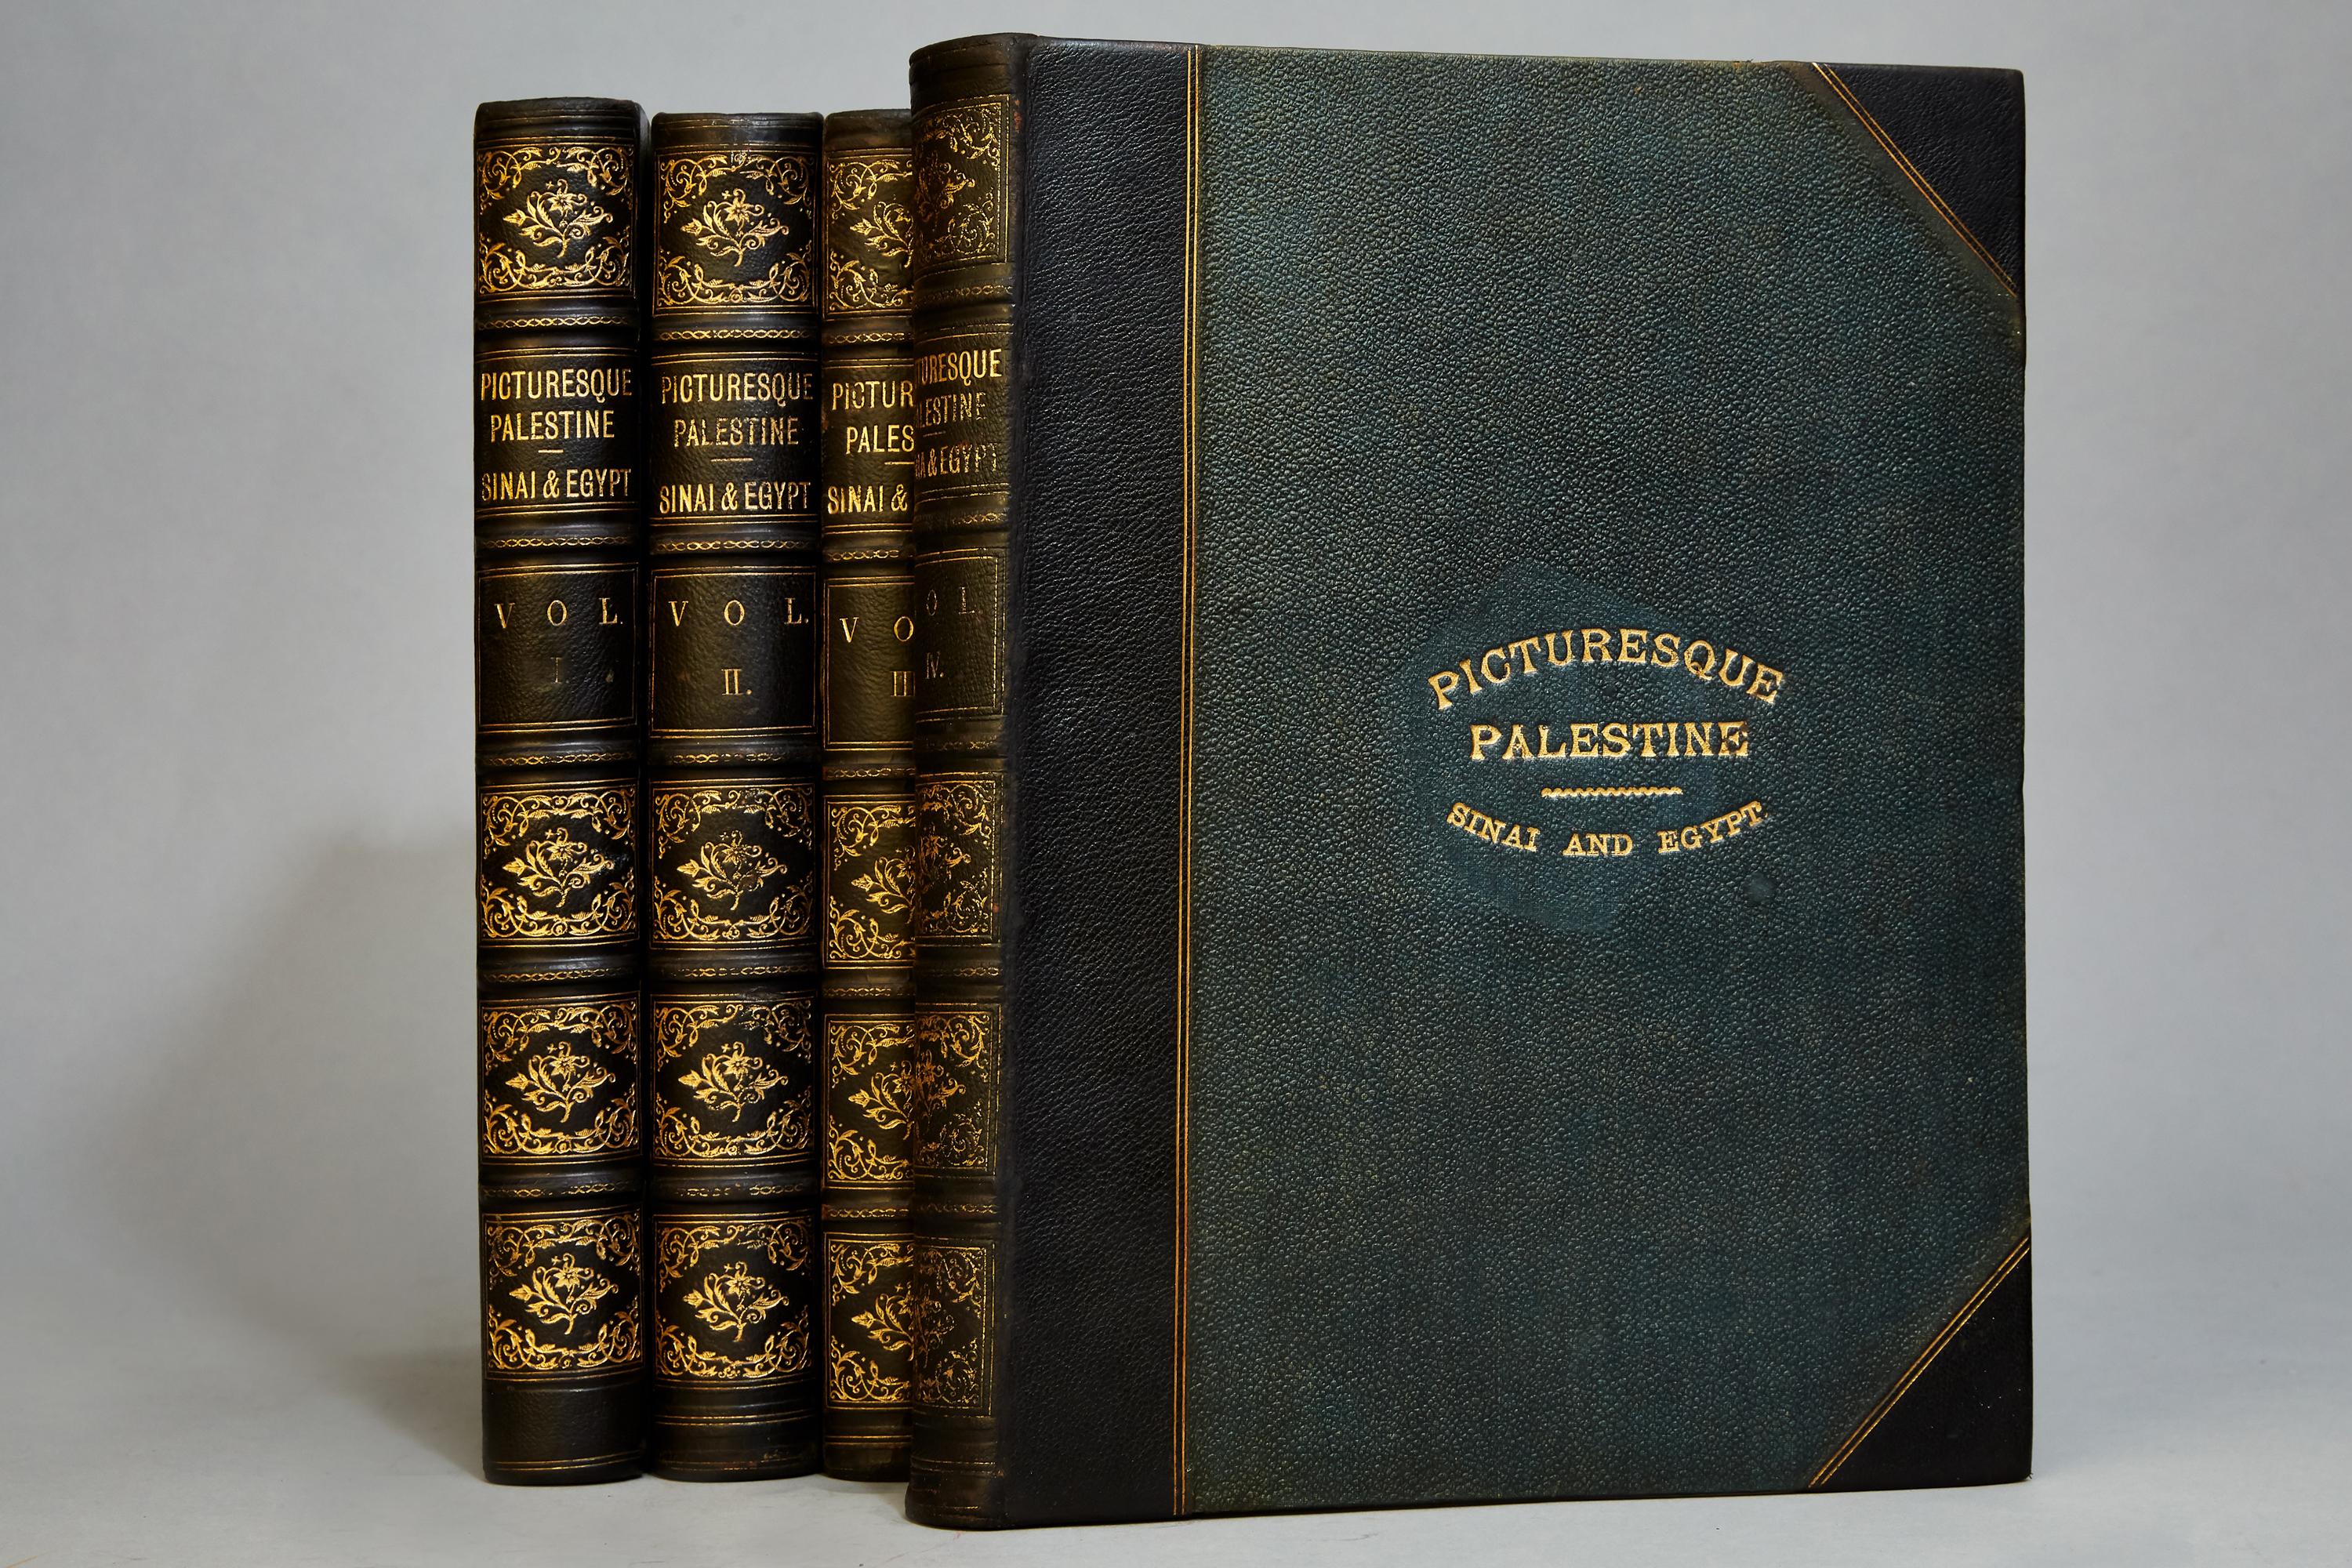 Col. Sir Charles W. Wilson

Picturesque Palestine, Sinai and Egypt. Assisted by The Most Eminent Palestine Explorers

4 volumes. Illustrated with numerous engravings on steel and wood. Bound in 3/4 green morocco. Cloth boards, all edges gilt, raised